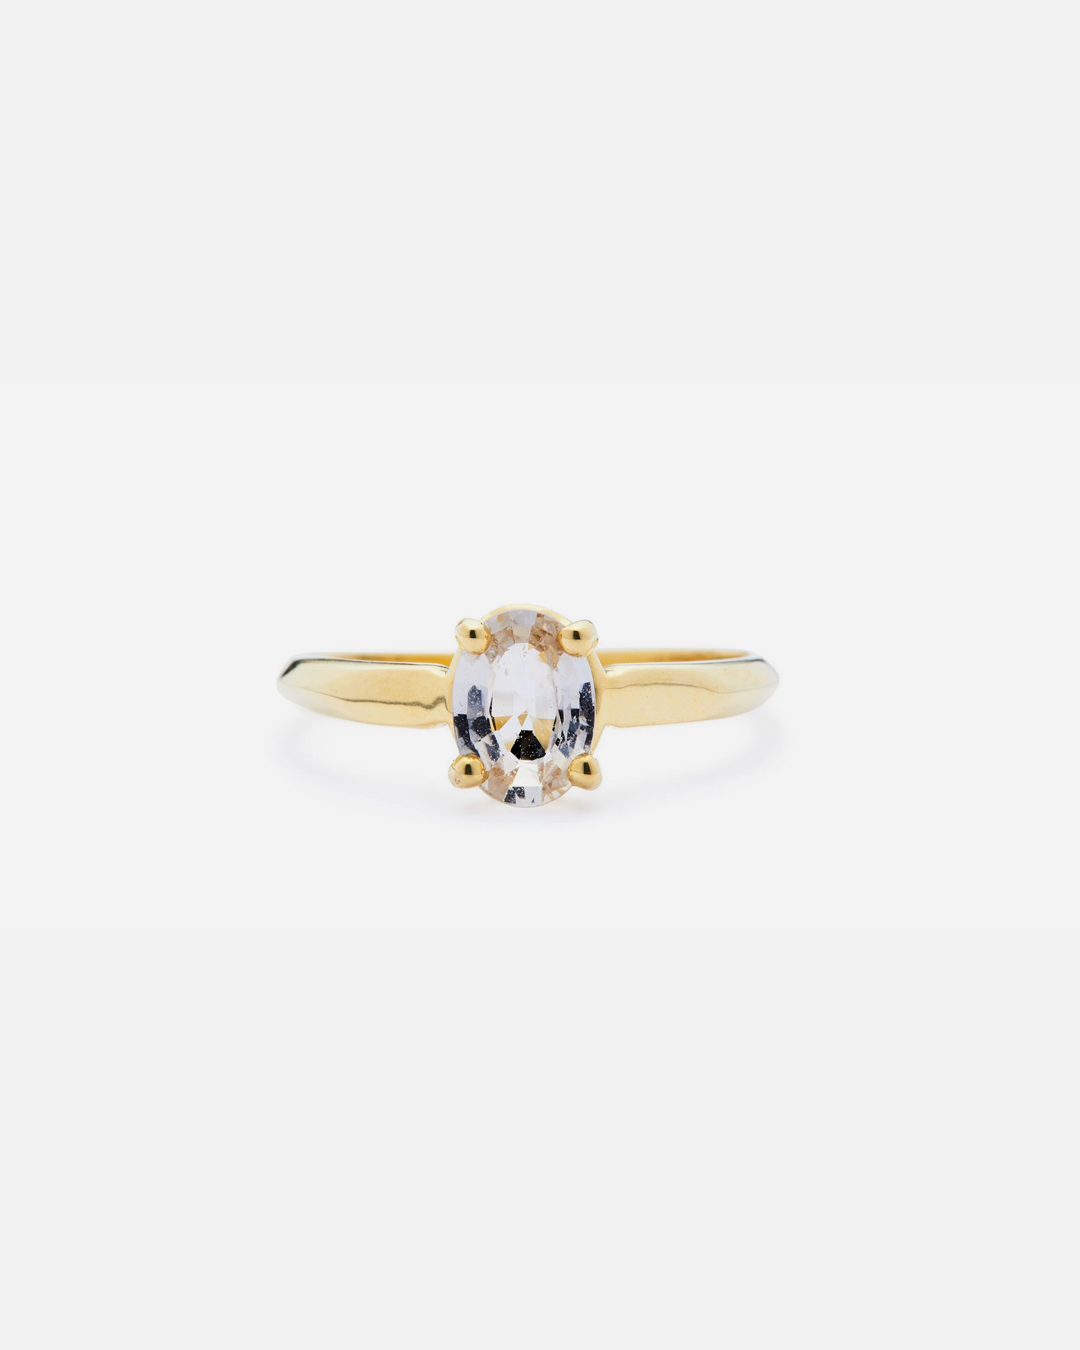 Leigh / White Sapphire Ring By Casual Seance in Engagement Rings Category